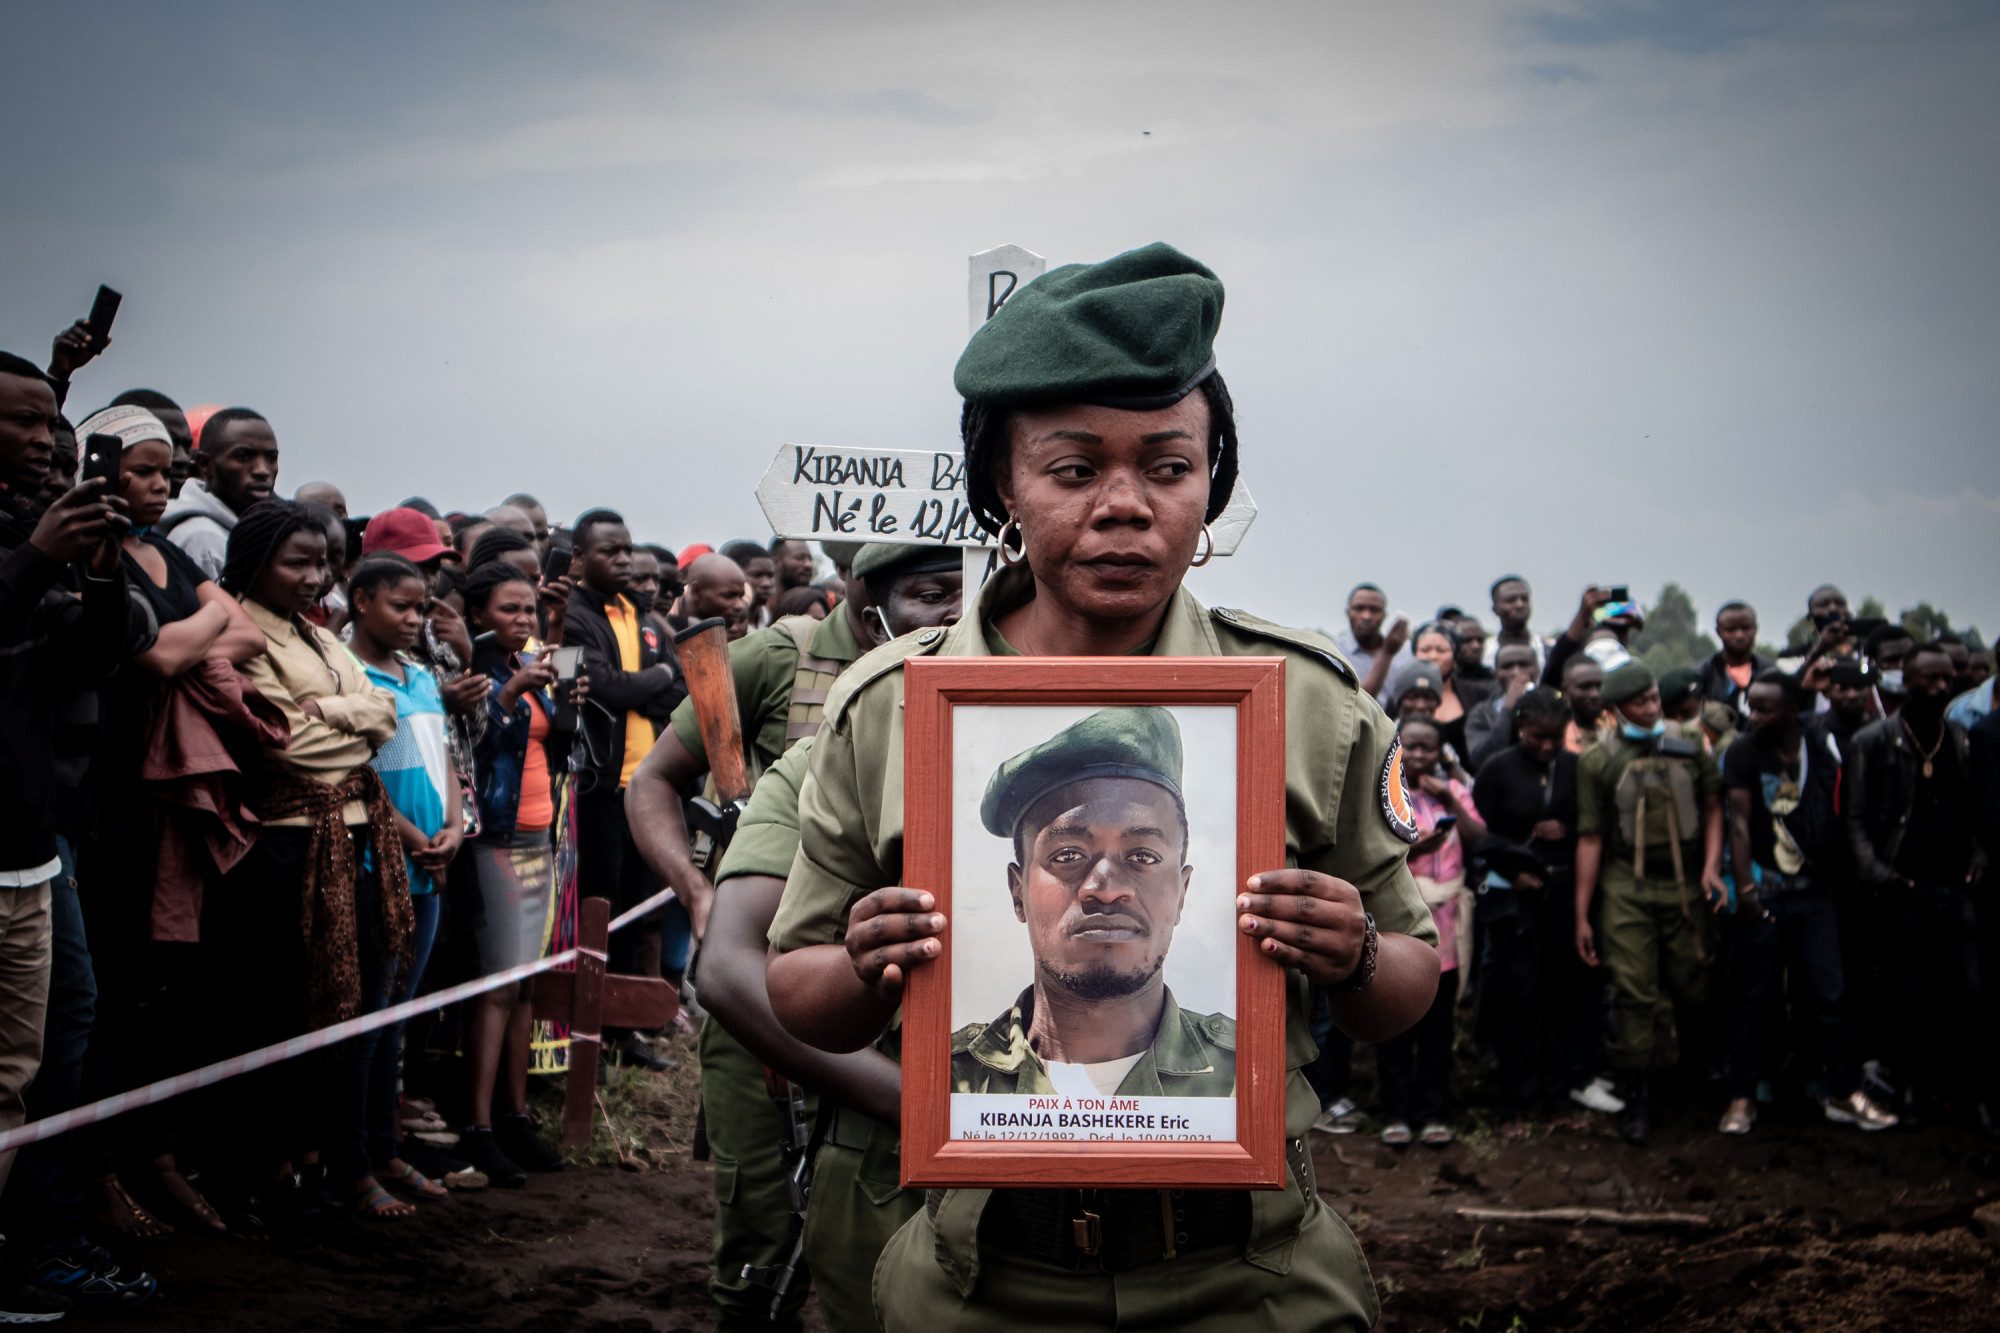 National Virunga Park, DRC, January 2021. Mourners attend the funeral of Eric Kibanja, one of six Virunga Park rangers killed in an ambush by armed attackers last month. The park has for years been the site of repeated attacks from rebels and militia groups, along with poachers and loggers, leading to the killing of hundreds of rangers. © Guerchom Ndebo for Fondation Carmignac